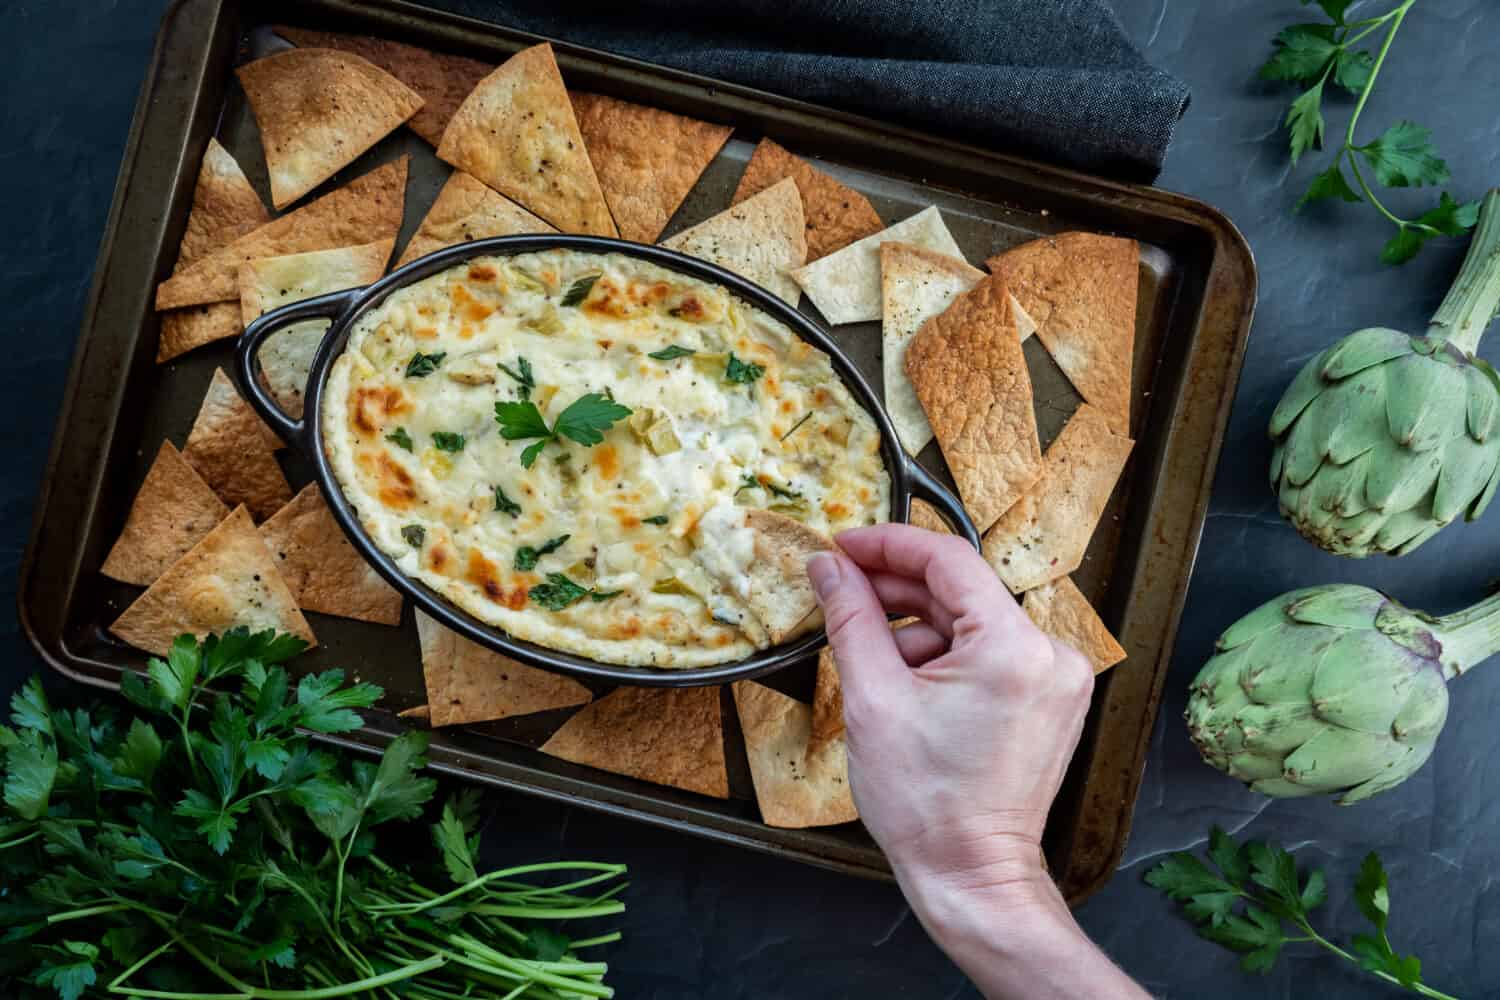 Top down view of a hand dipping a pita triangle into a warm artichoke dip.